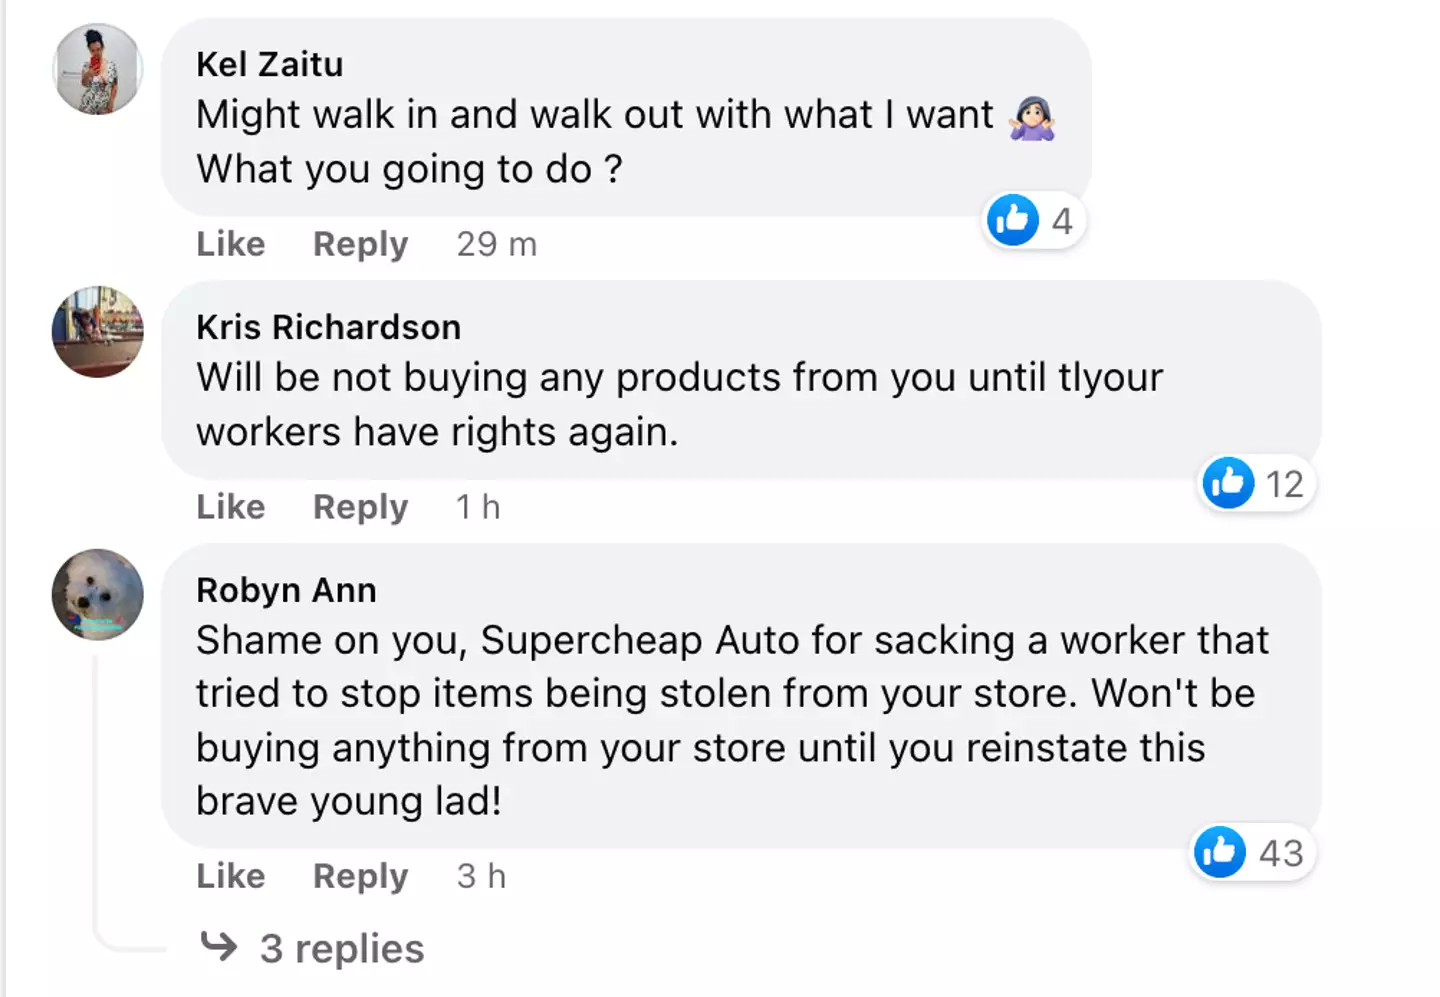 Supercheap Auto has faced backlash on social media after making its employee stand down after he helped apprehend a thief.